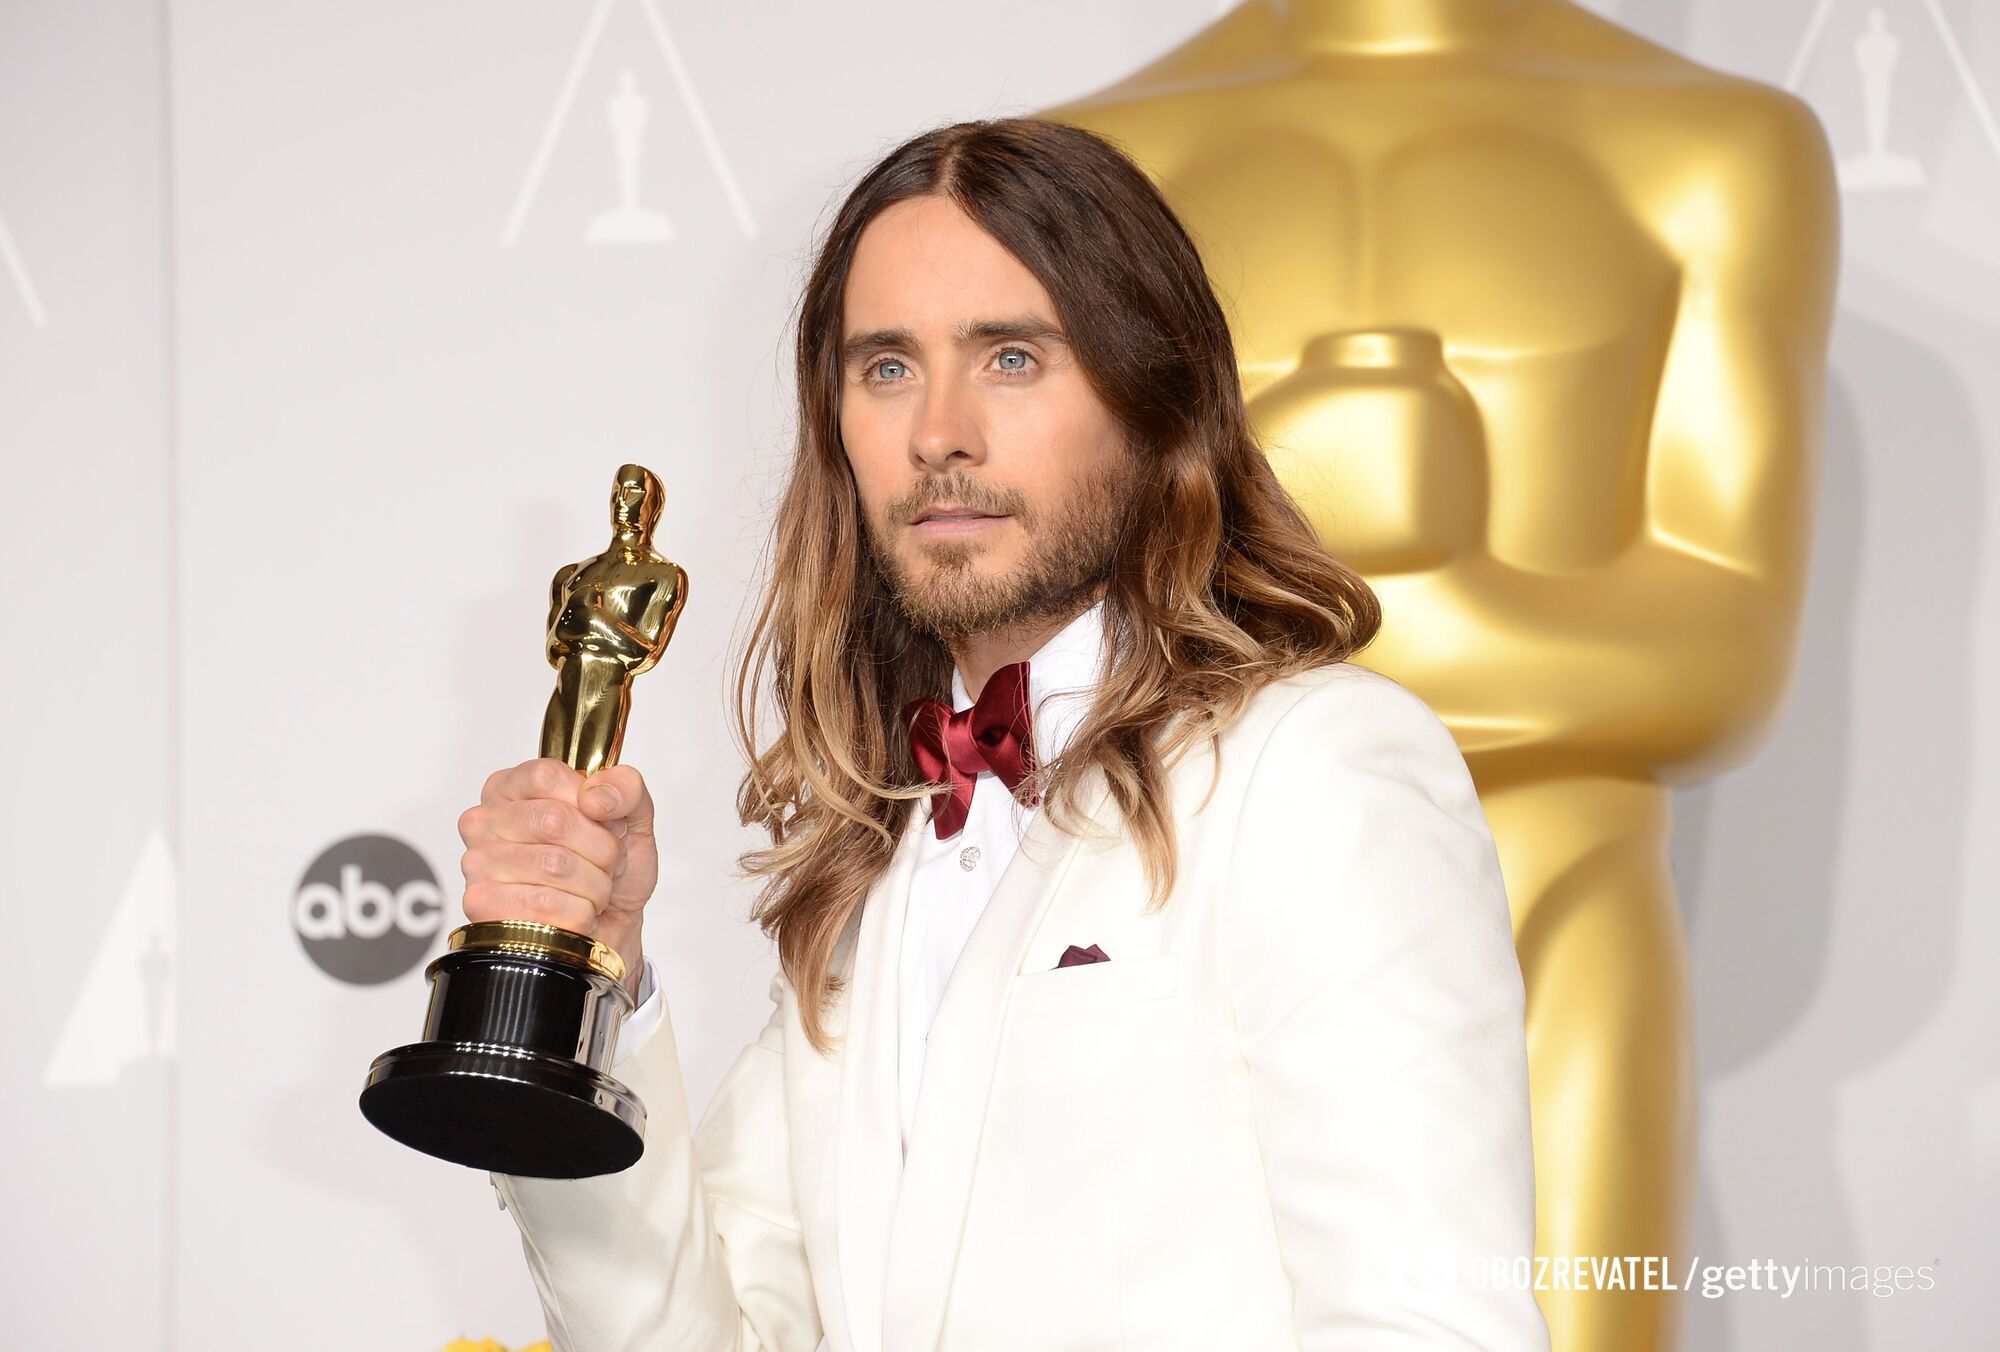 He supported Ukraine when it was not yet mainstream: 10 interesting facts about the Hollywood sex symbol Jared Leto